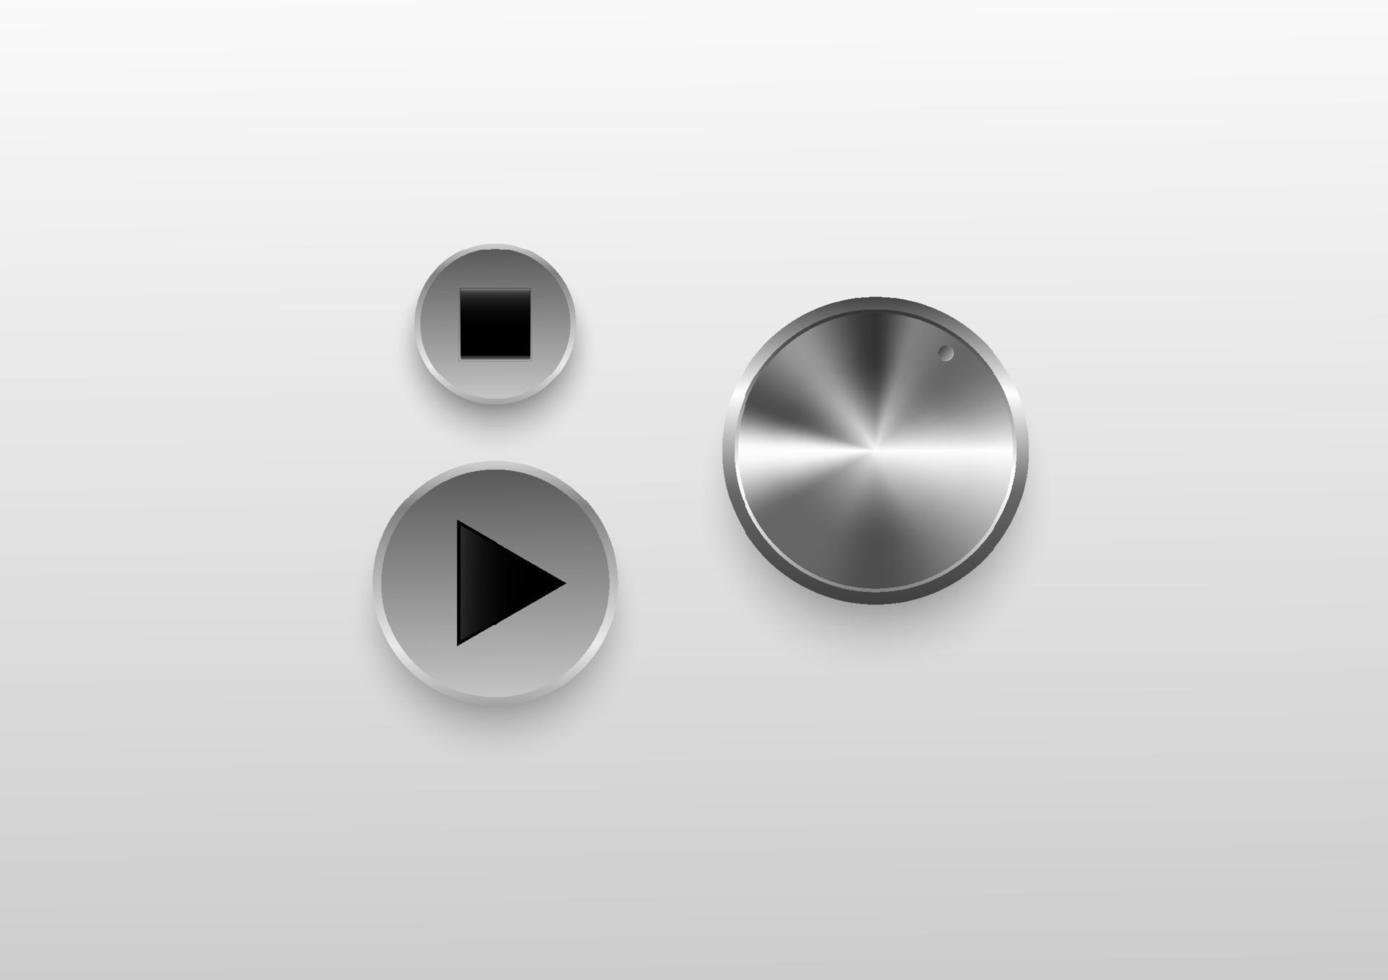 Technology dial knob, play and stop button with metal texture for sound control. Vector illustration.